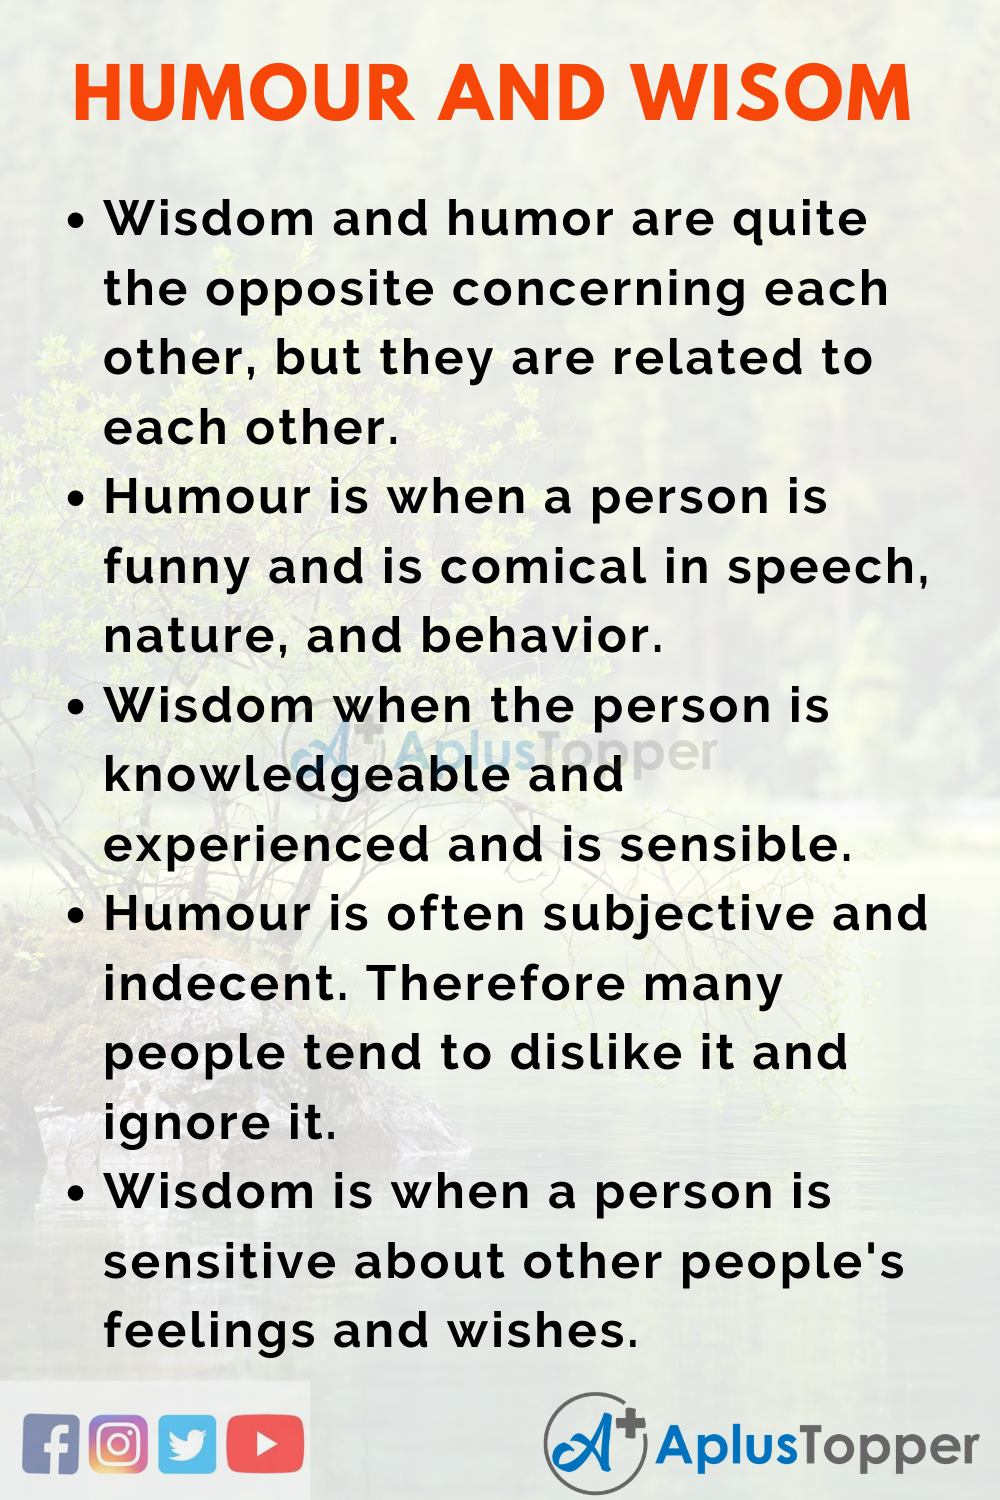 Humour And Wisdom Speech | Speech On Humor And Wisdom for Students and  Children in English - A Plus Topper